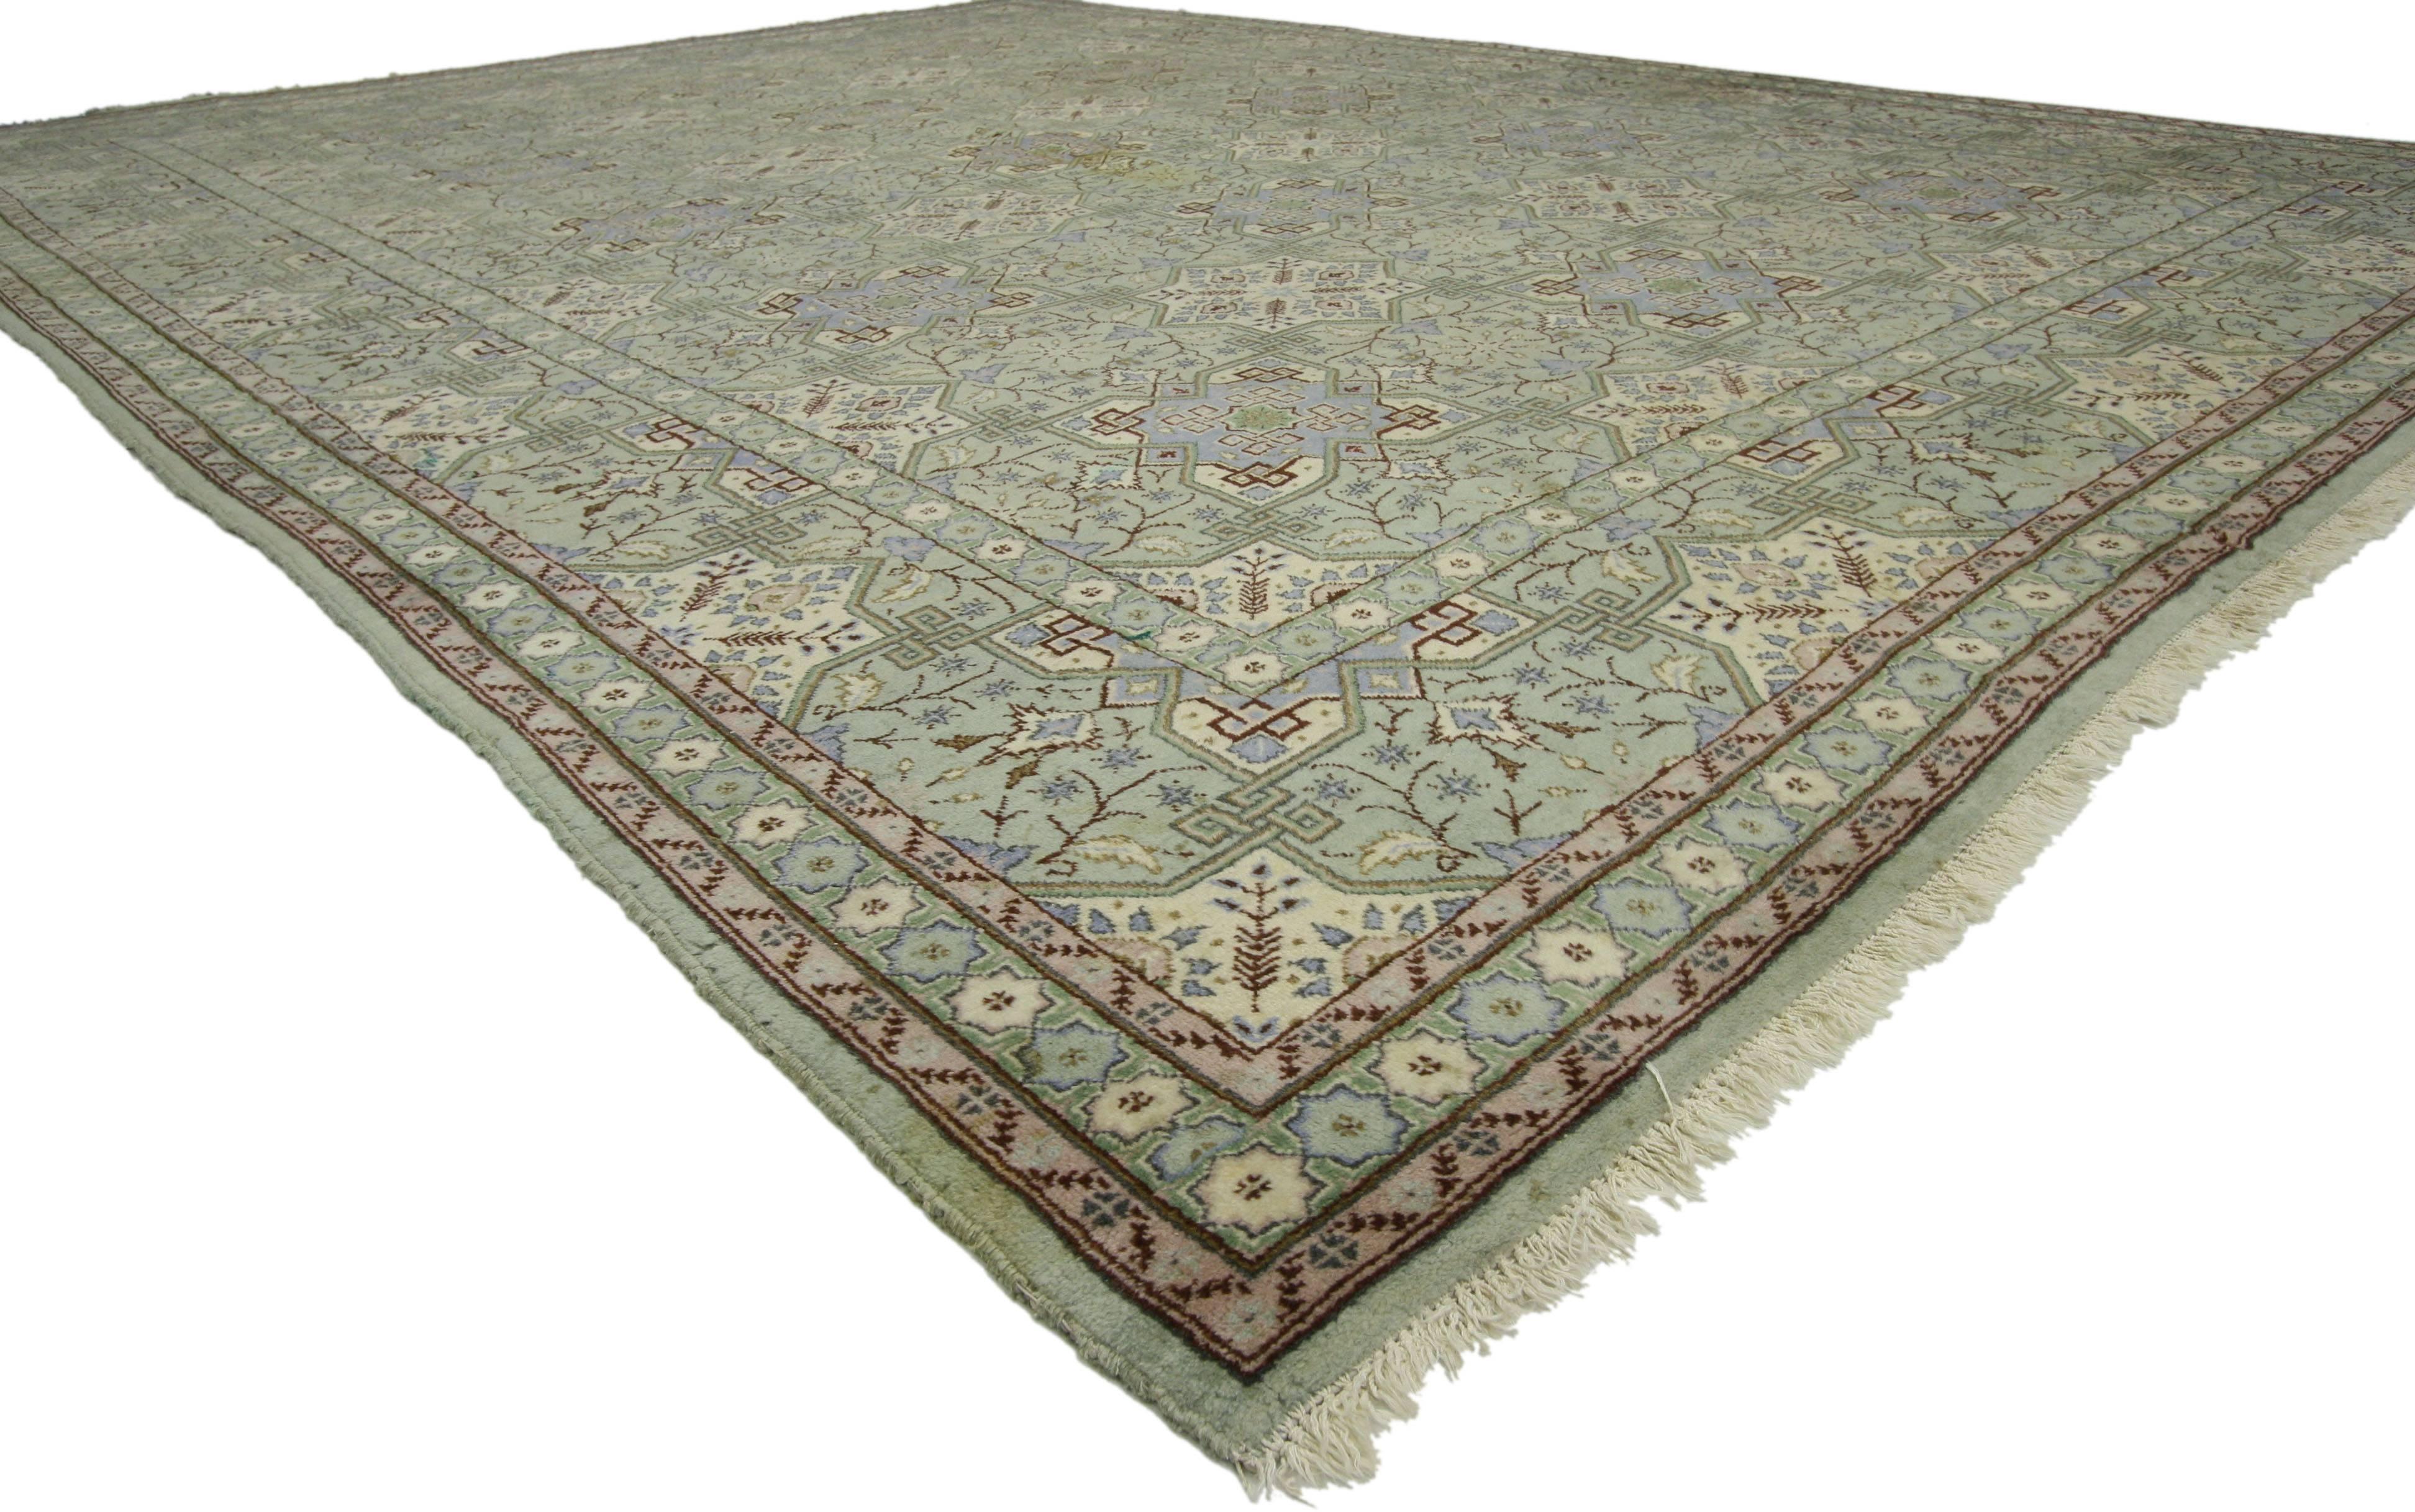 75731 Vintage Persian Isfahan Rug with Gustavian Grace and Georgian Style 08'07 x 11'06. With dreamy hues and well-balanced symmetry paired with captivating elegance, this hand-knotted wool vintage Persian Isfahan rug beautifully embodies both